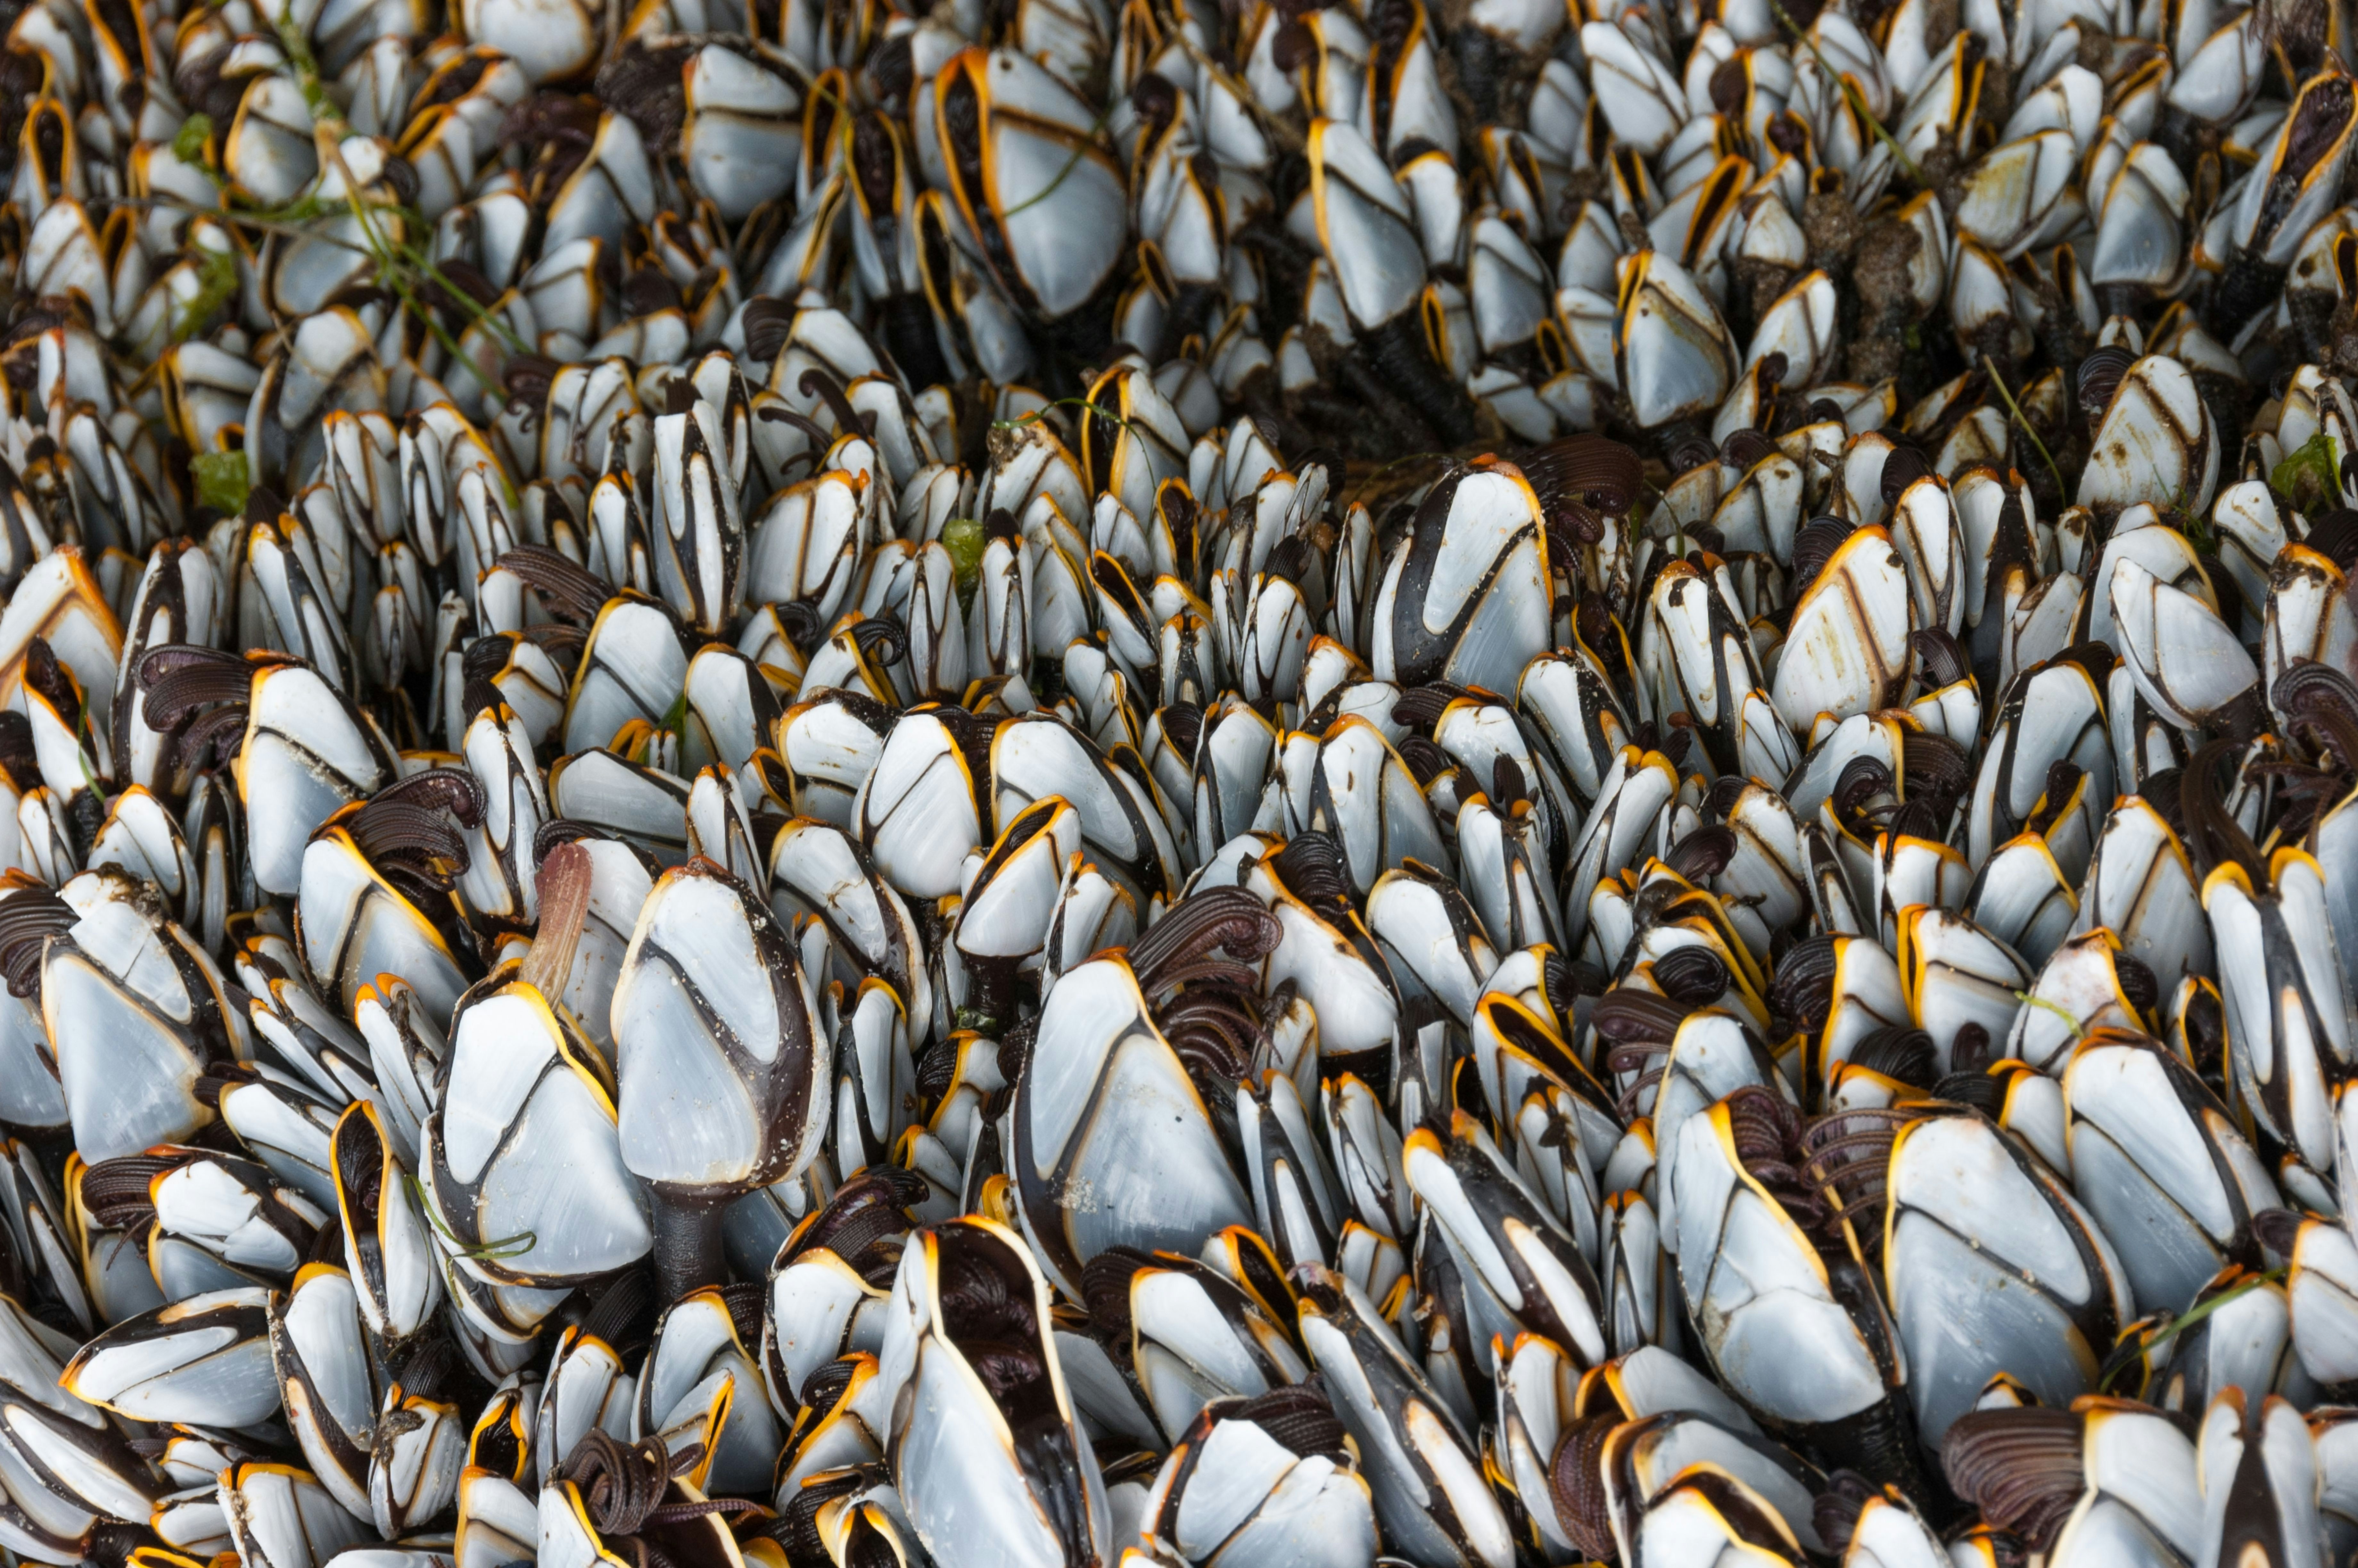 Goose barnacles found on a log on the beach at St. Aubin's Bay, St. Lawrence, Jersey, Channel Islands